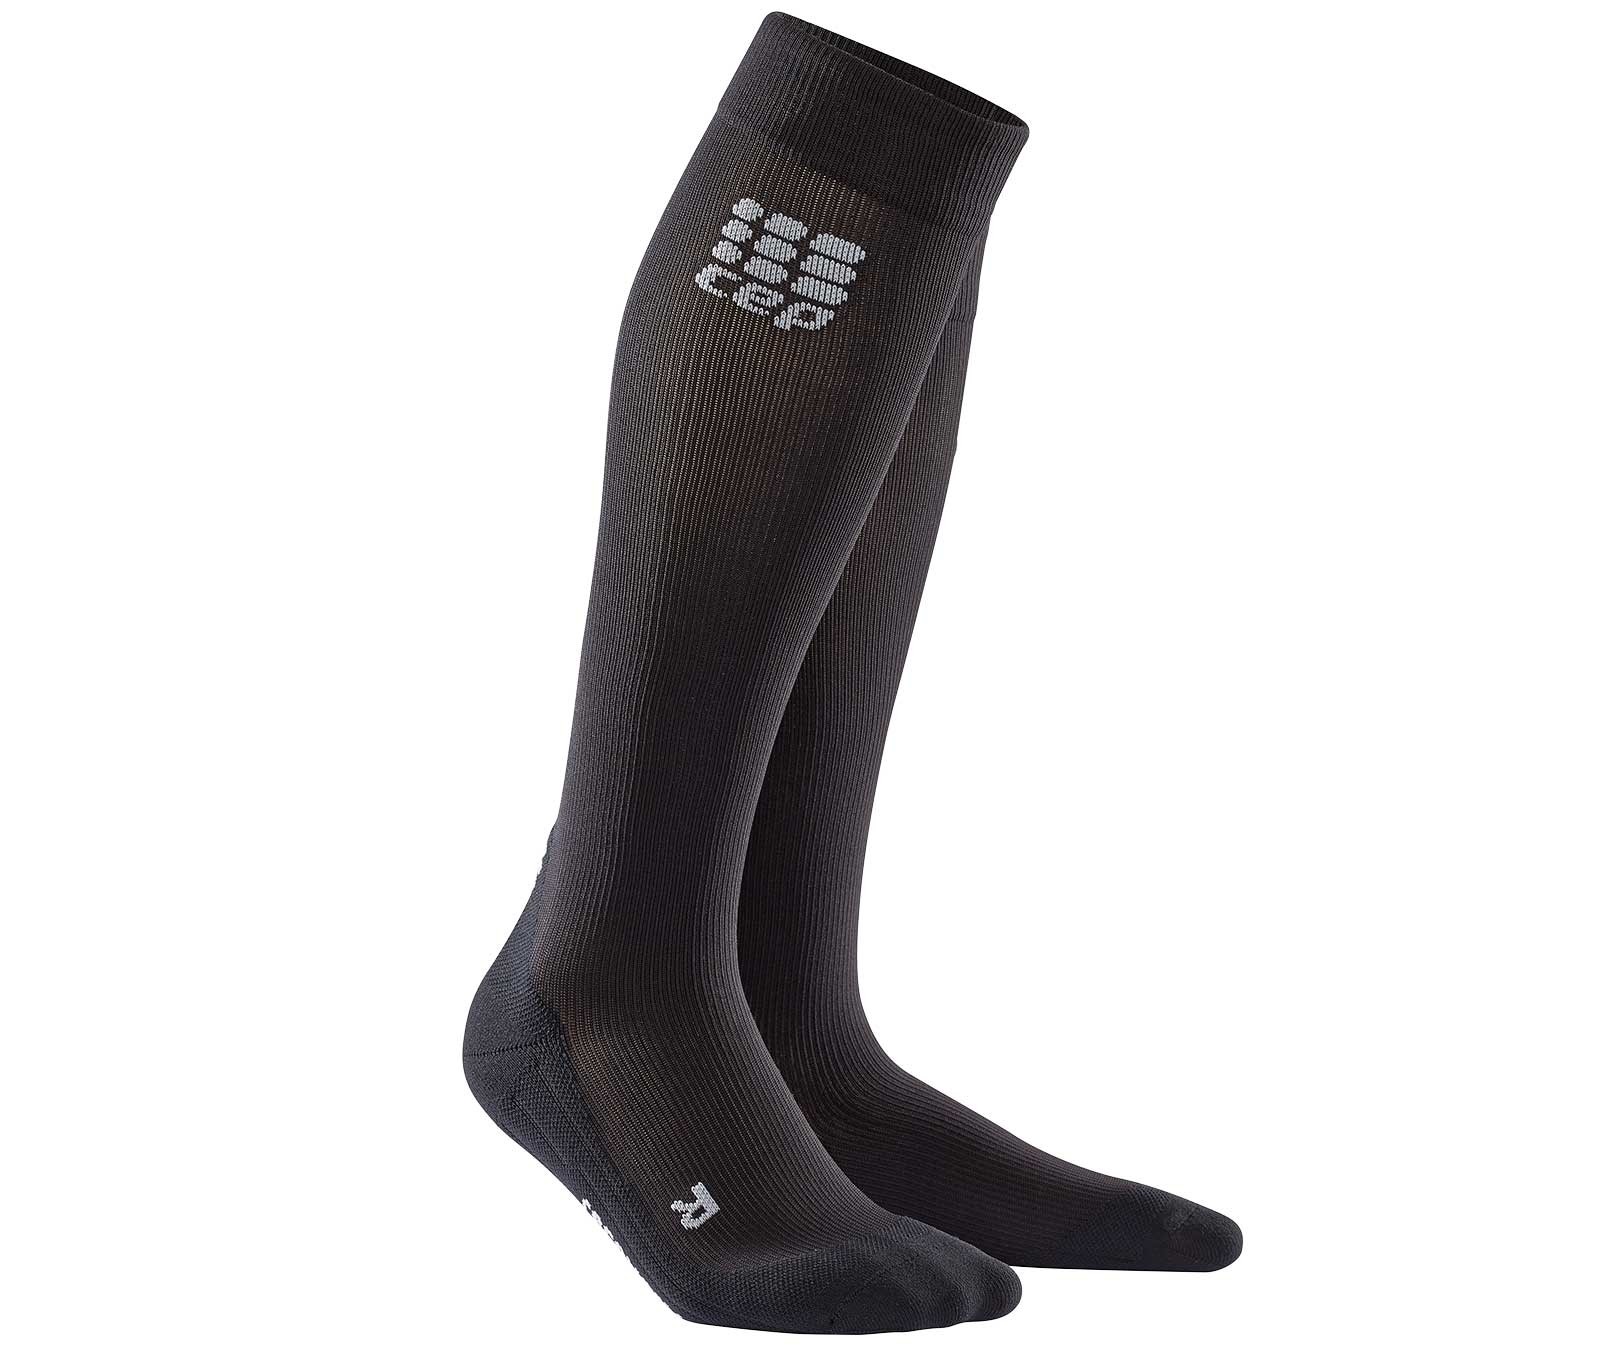 Cep socks for recovery smart infrared